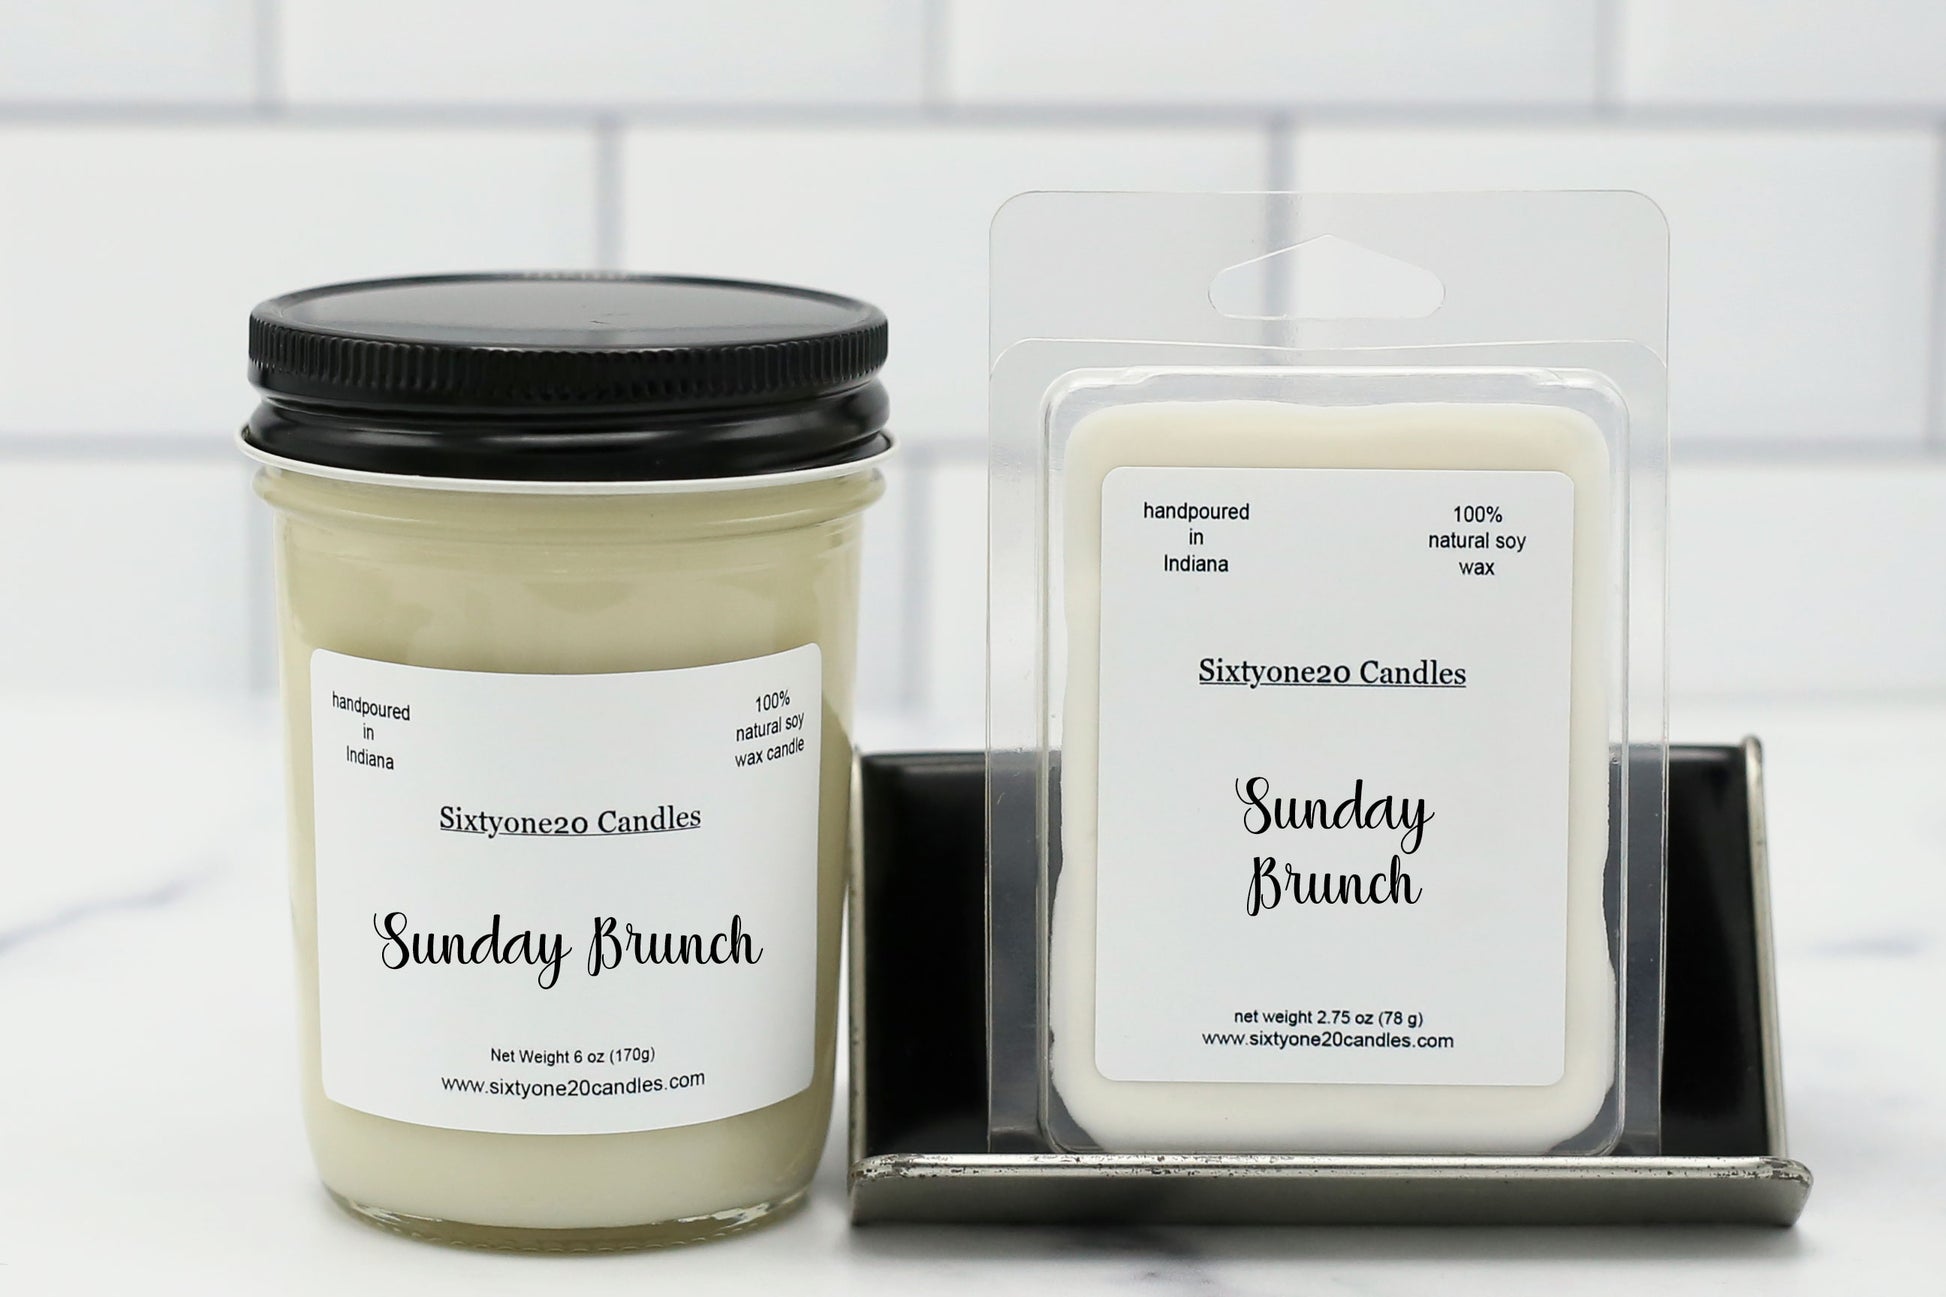 Sunday Brunch 100% soy wax candle and melt